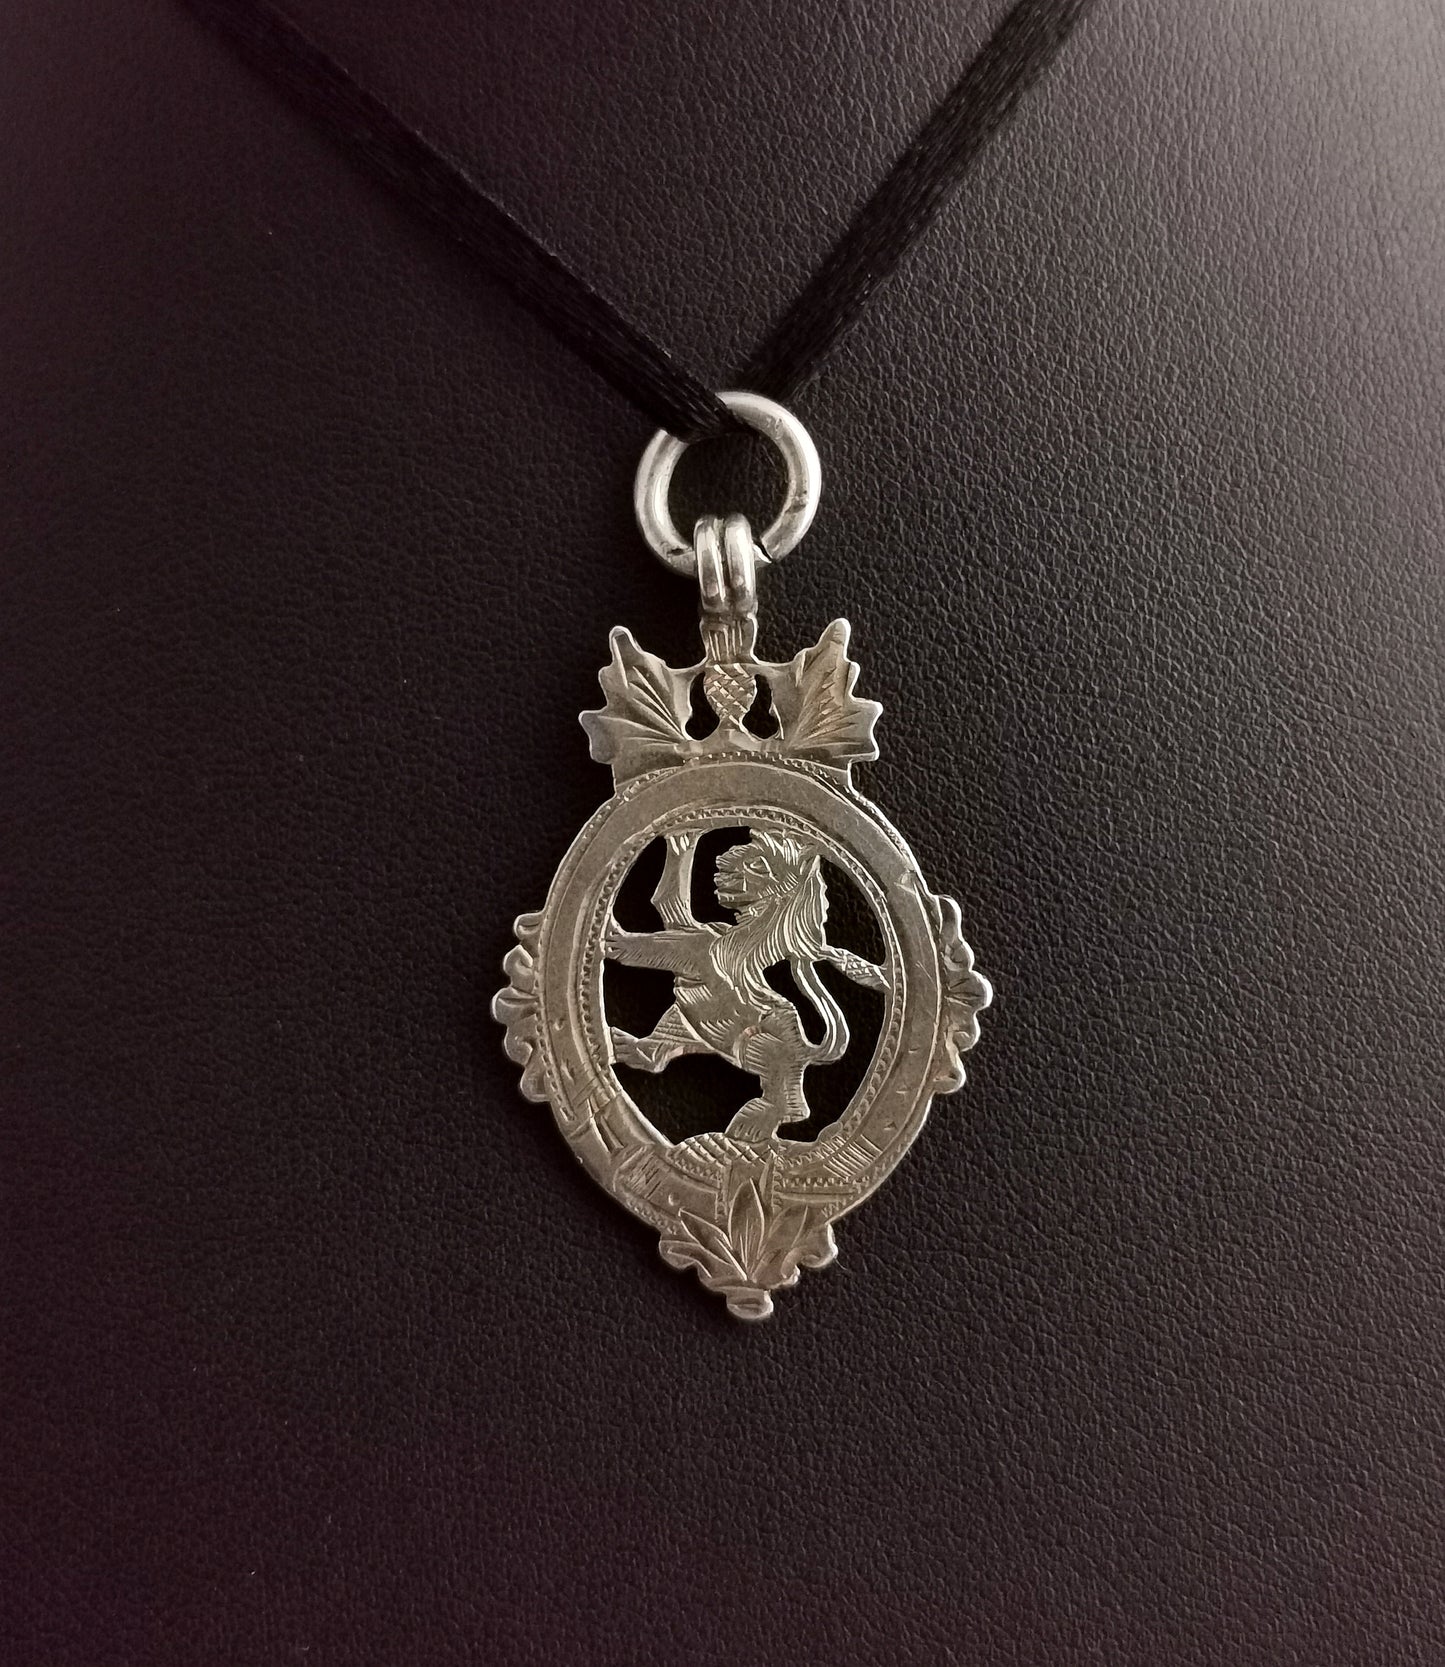 Vintage sterling silver fob pendant, Lion, Thistle and buckle